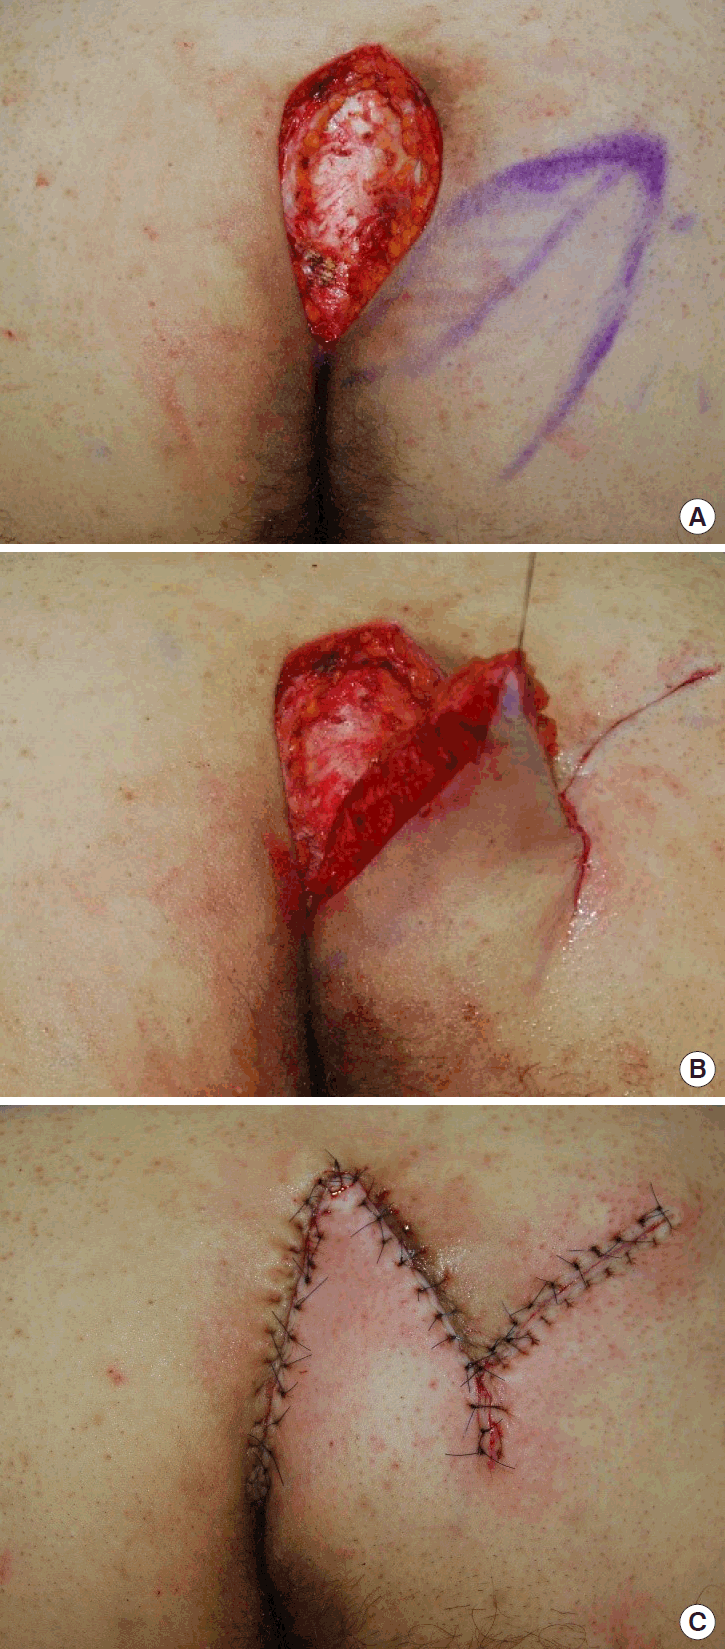 Treating pilonidal sinus wounds with an antibacterial wound gel after  incision and drainage